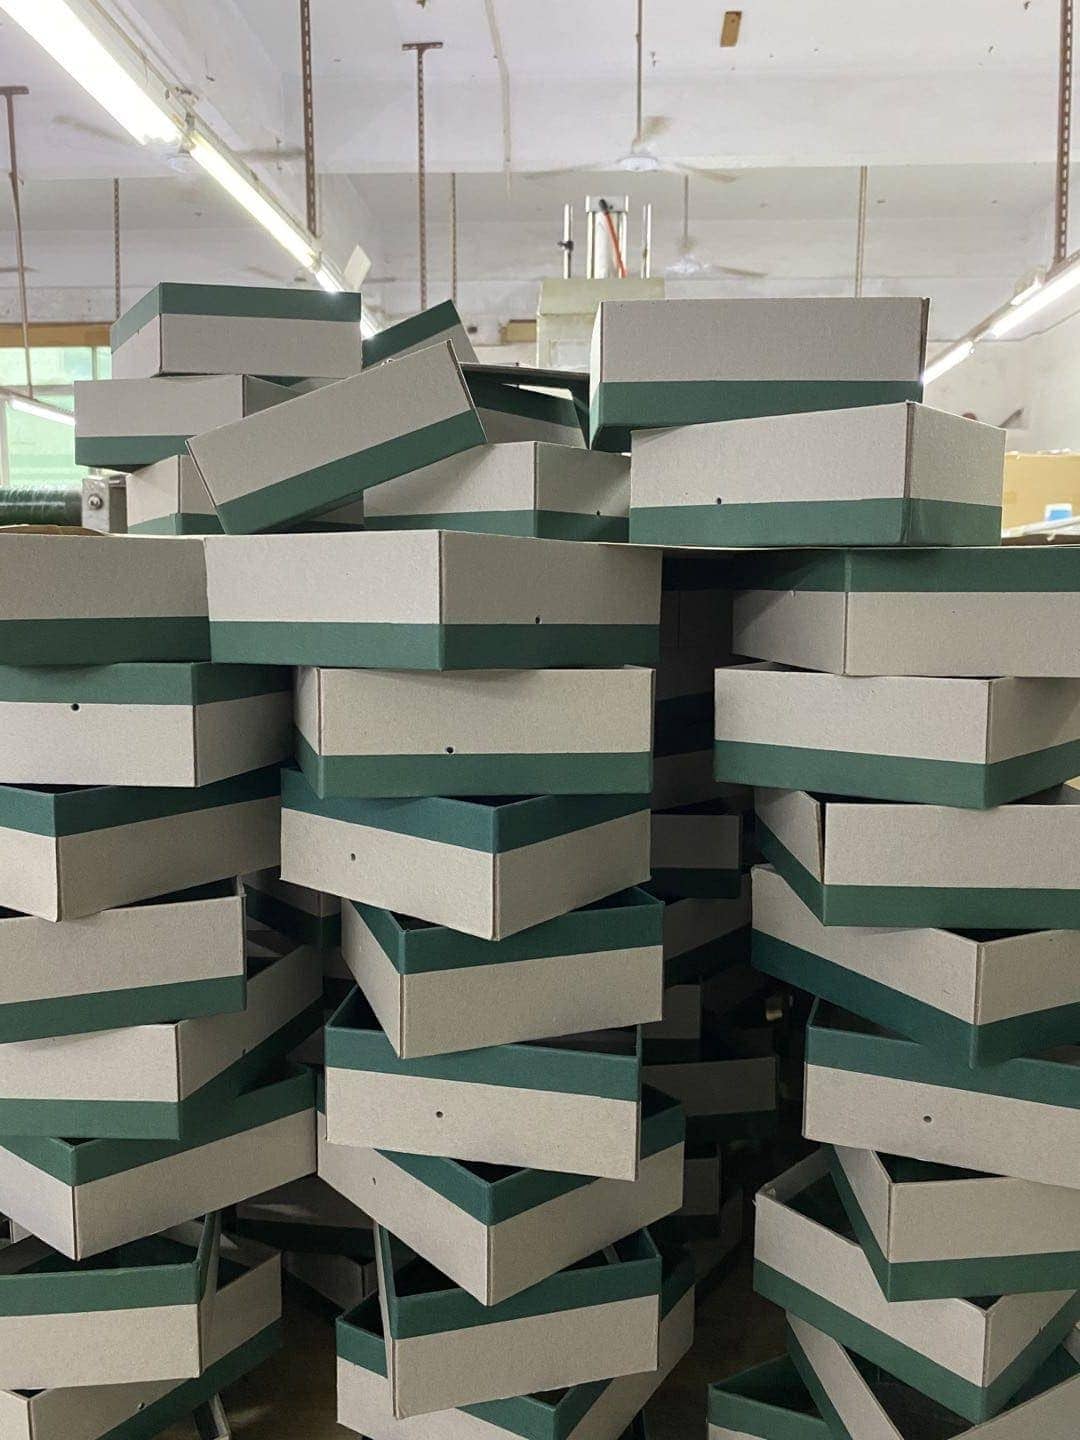 the sheer joy of seeing stacked boxes